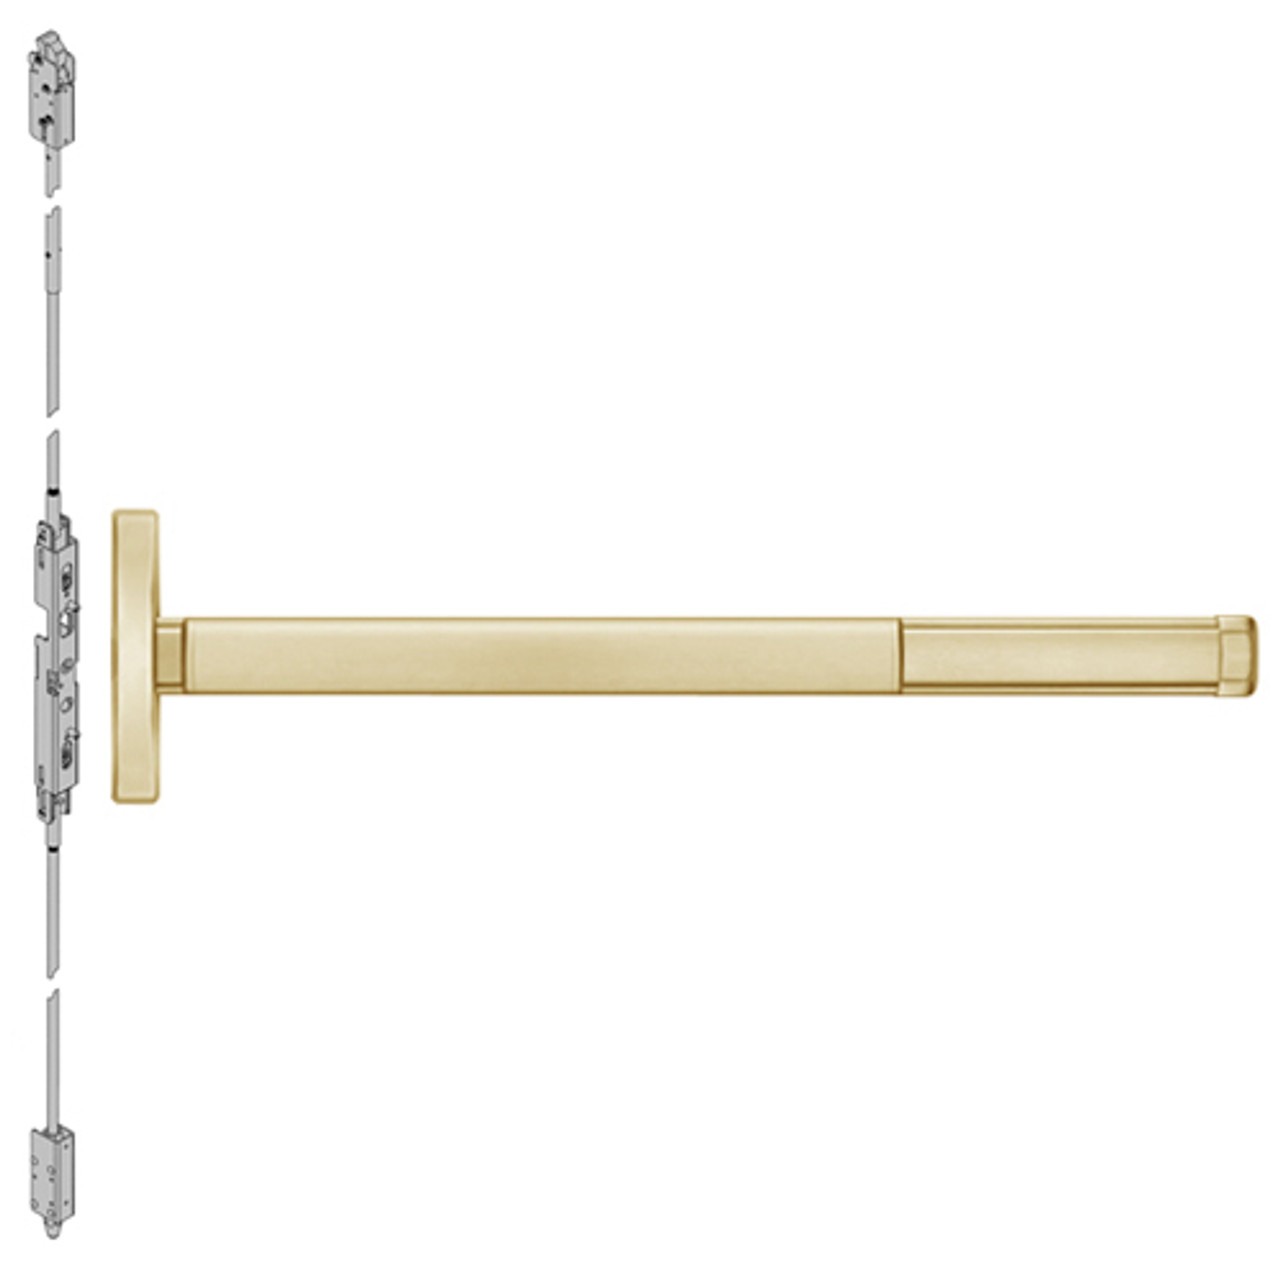 ELR2602LBR-606-36 PHI 2600 Series Concealed Vertical Rod Exit Device with Electric Latch Retraction Prepped for Dummy Trim in Satin Brass Finish